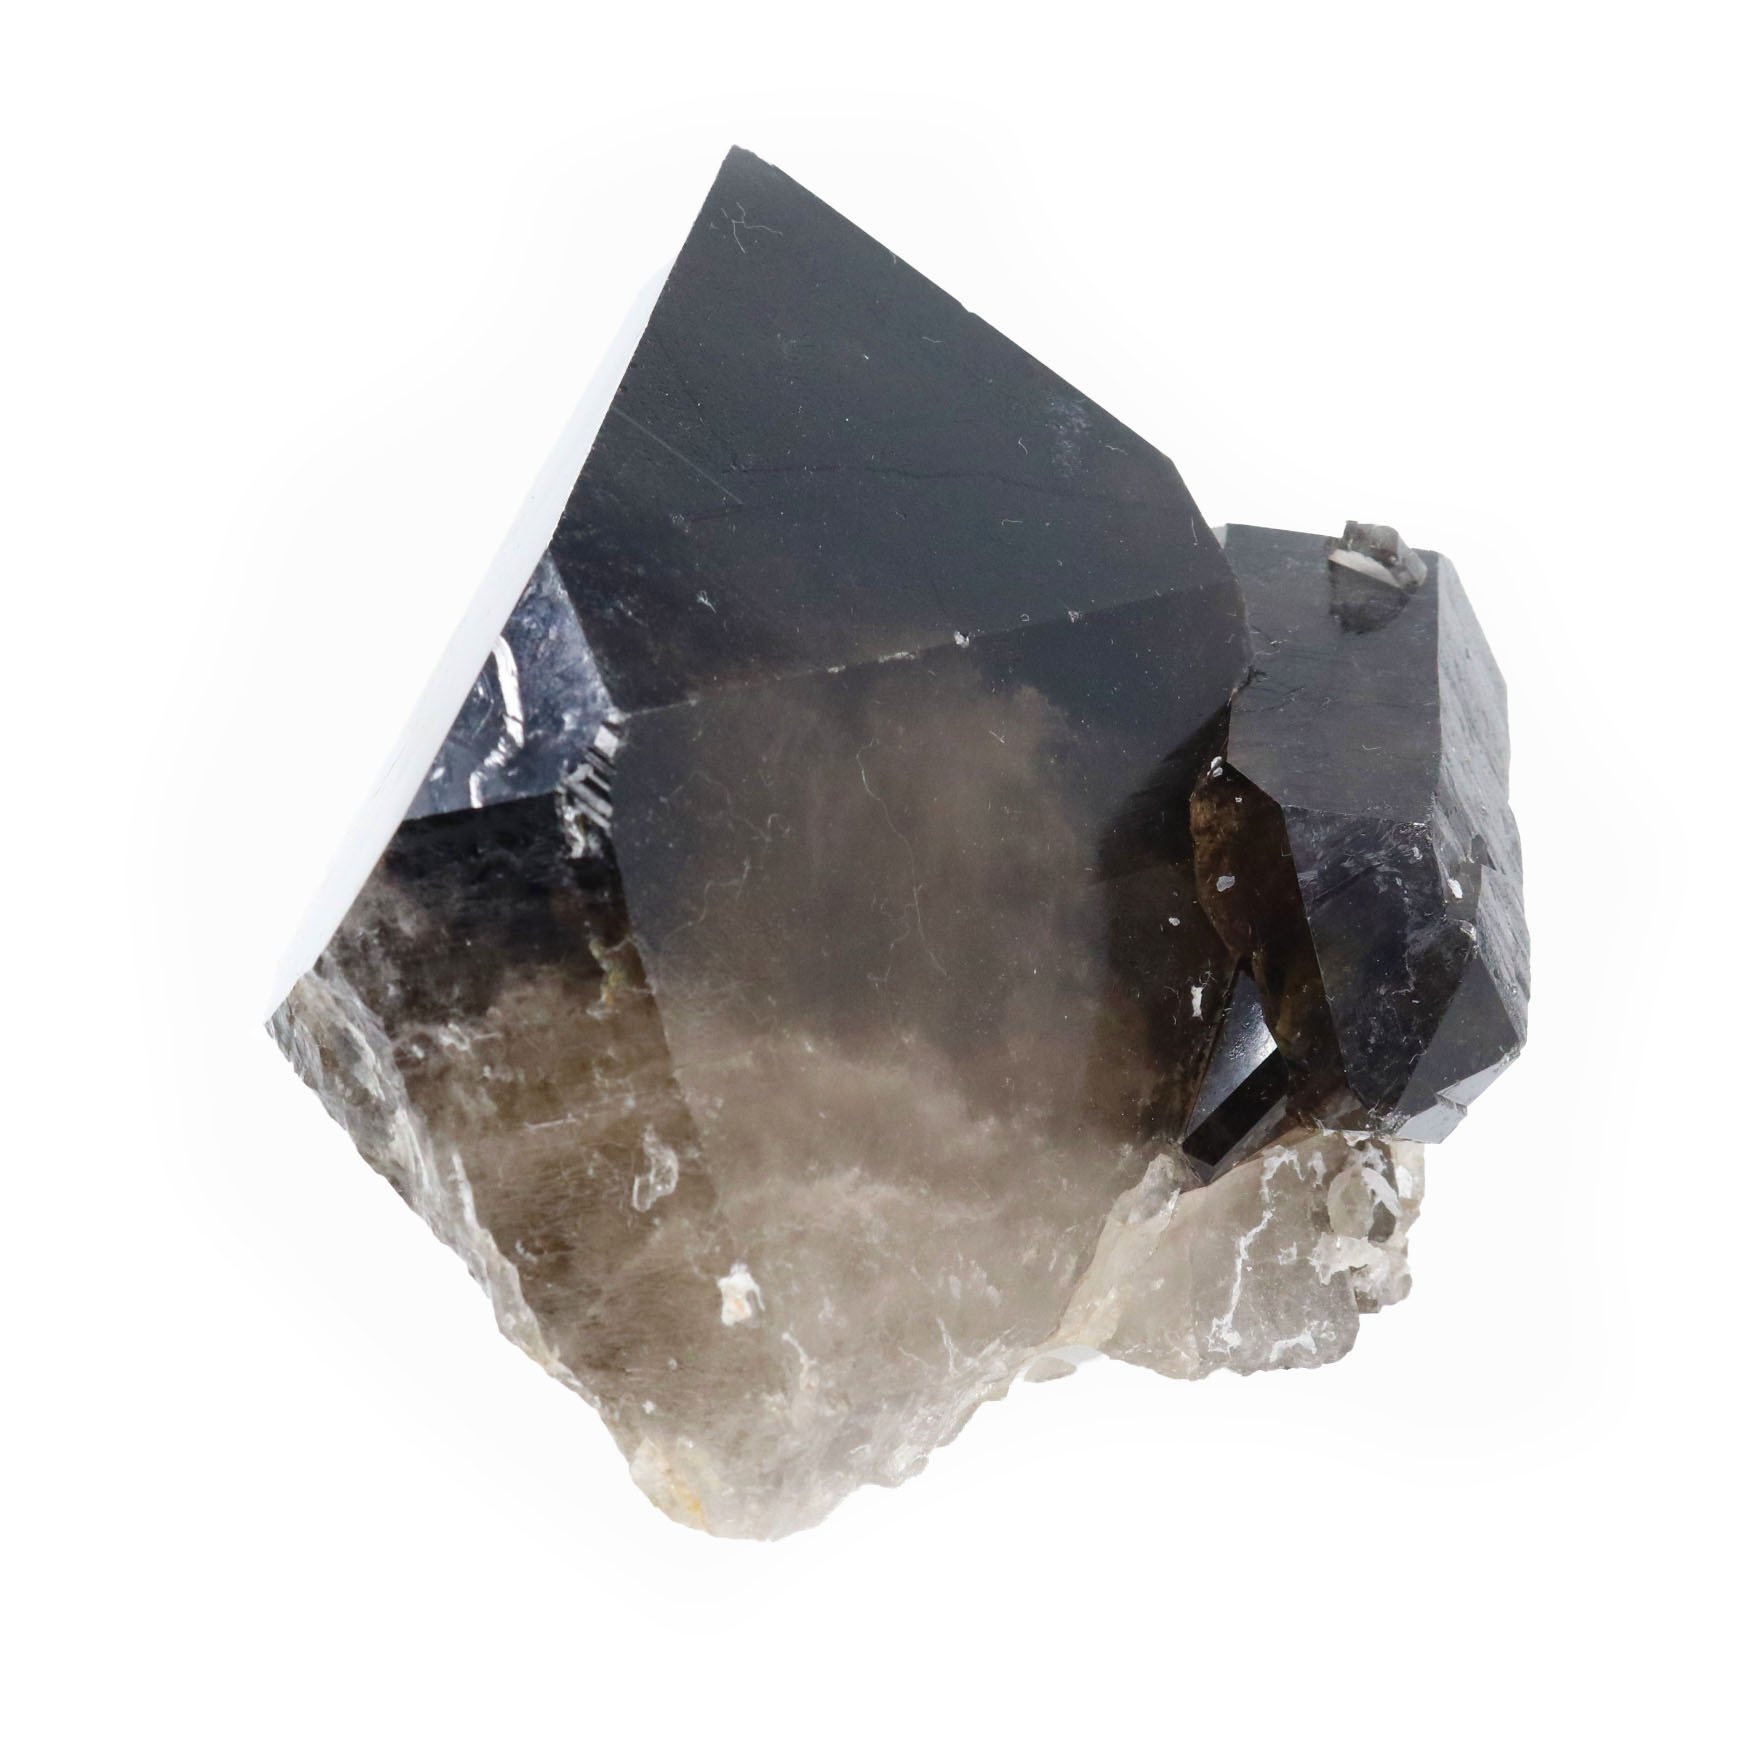 Smoky Quartz Twin Crystals With Double Terminated Feature And Albite Crystals